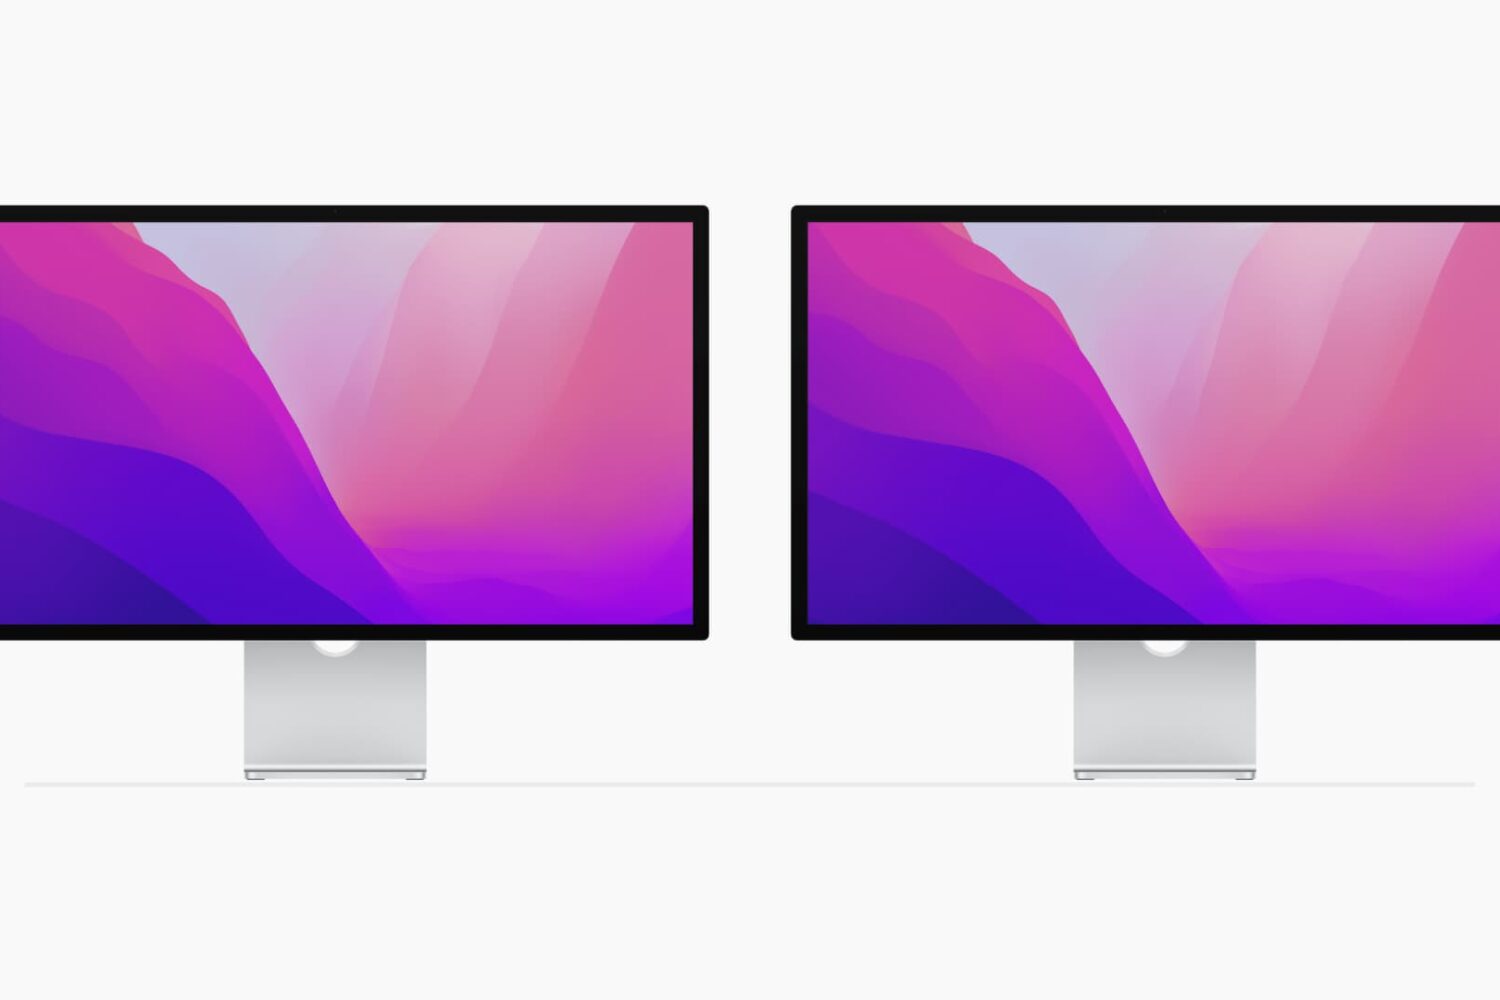 Two Mac displays placed side by side